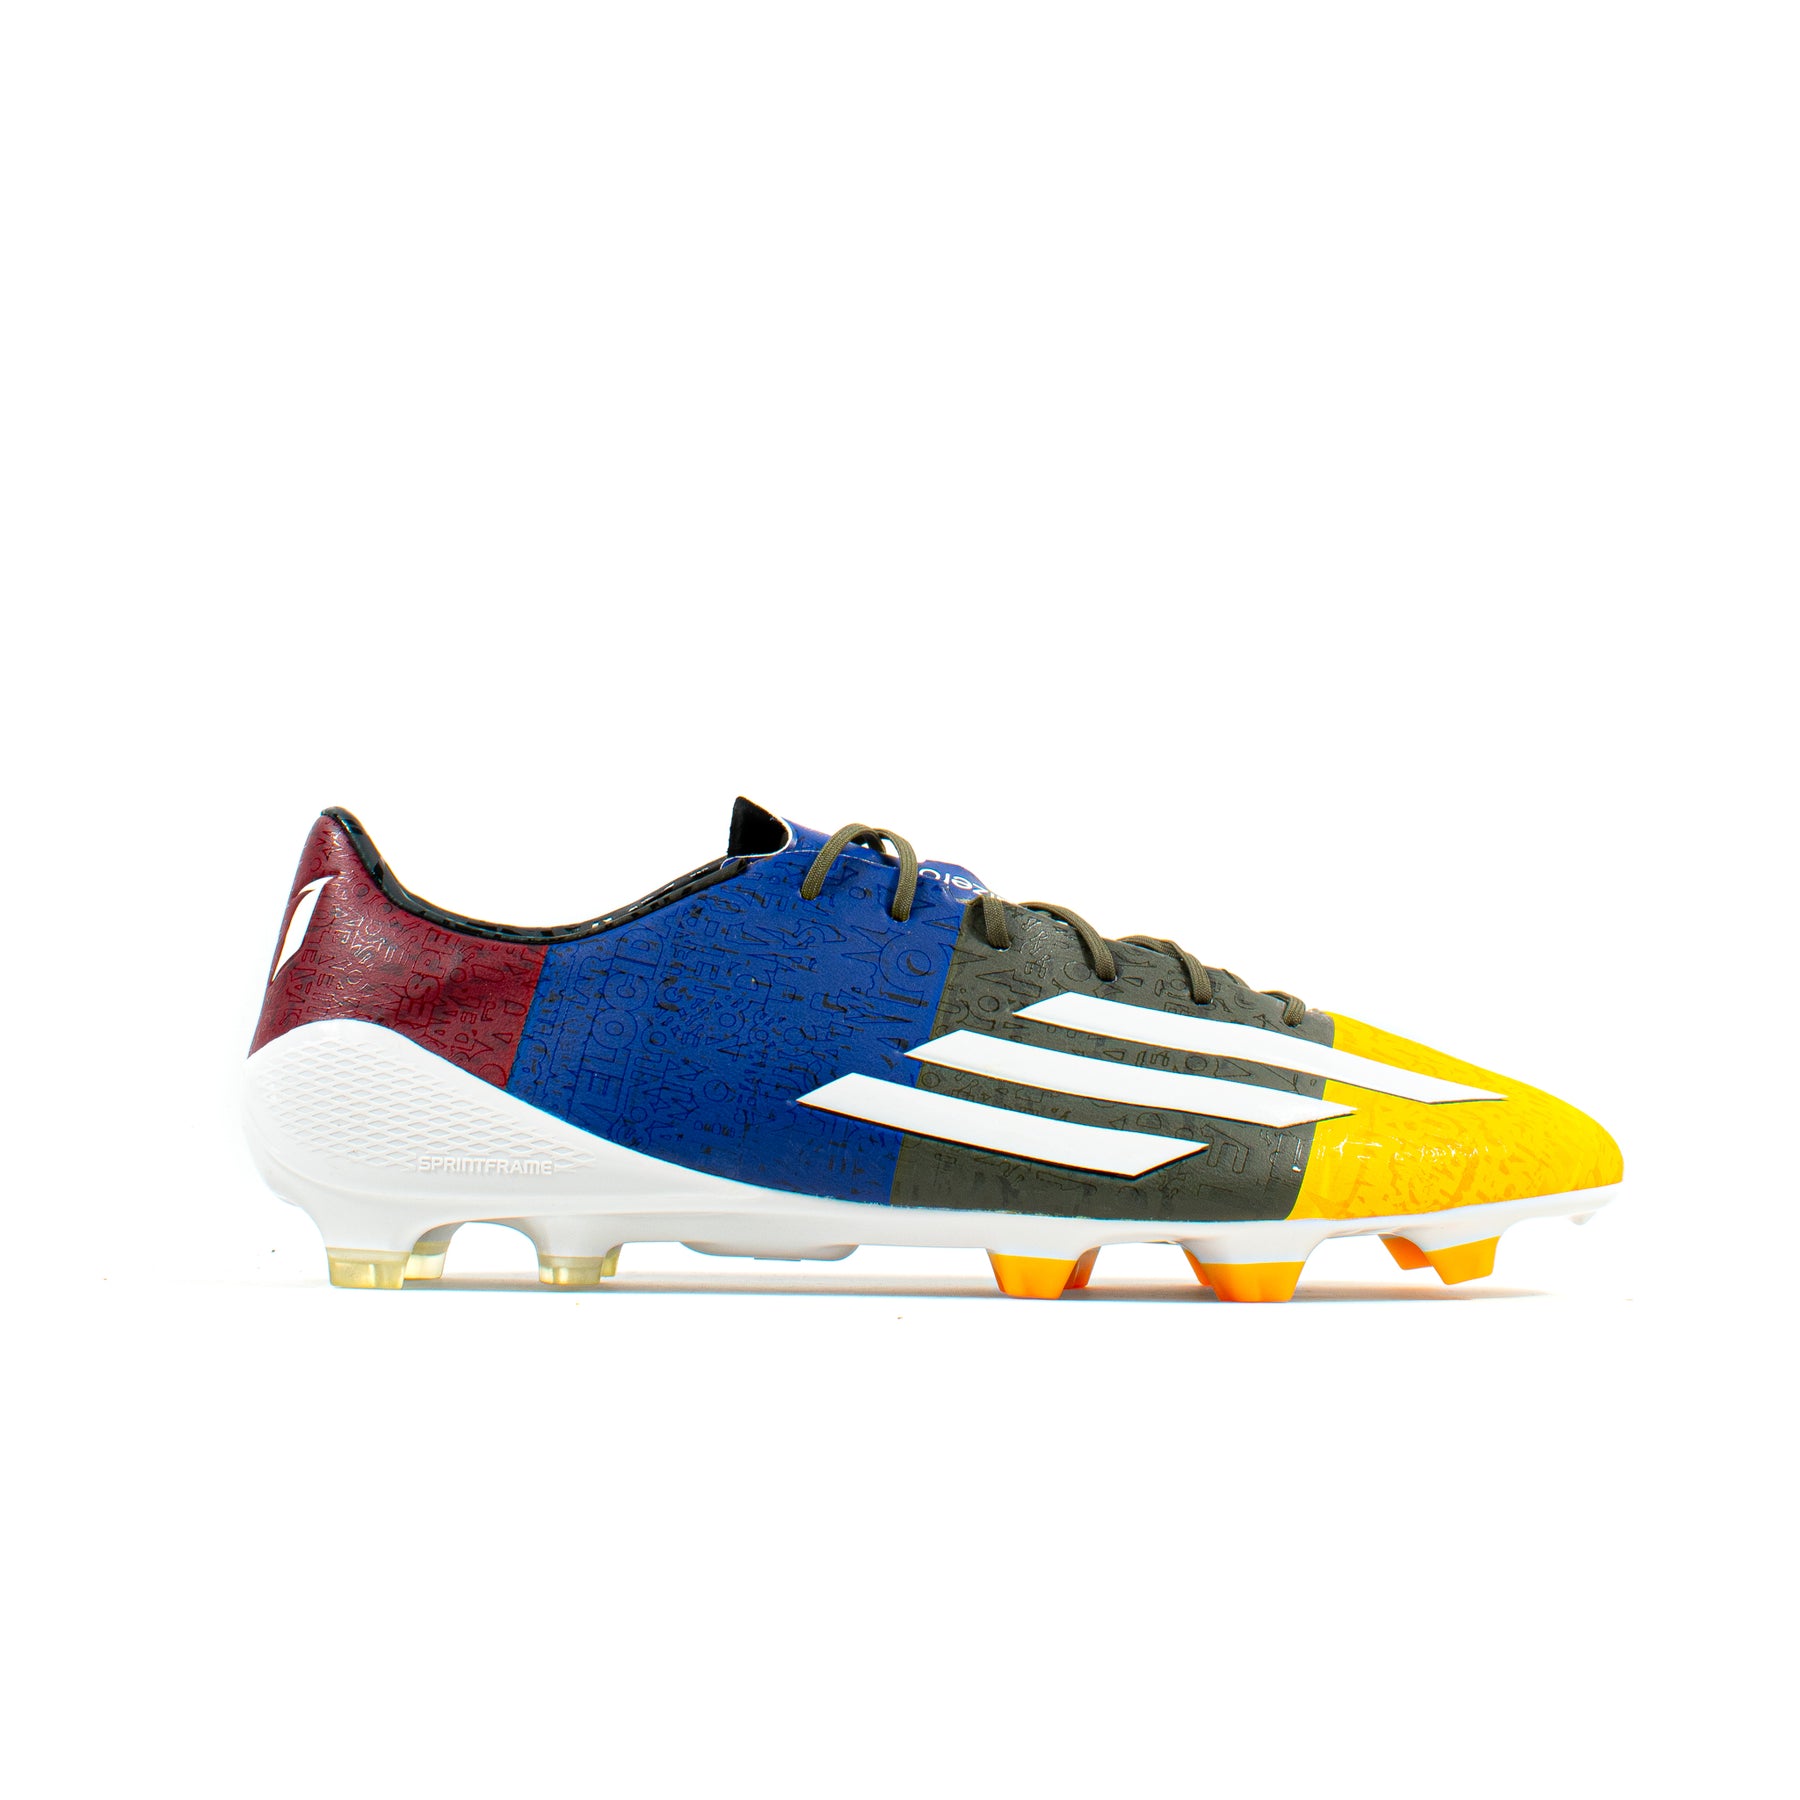 Adidas F50 Messi FG – Classic Soccer Cleats